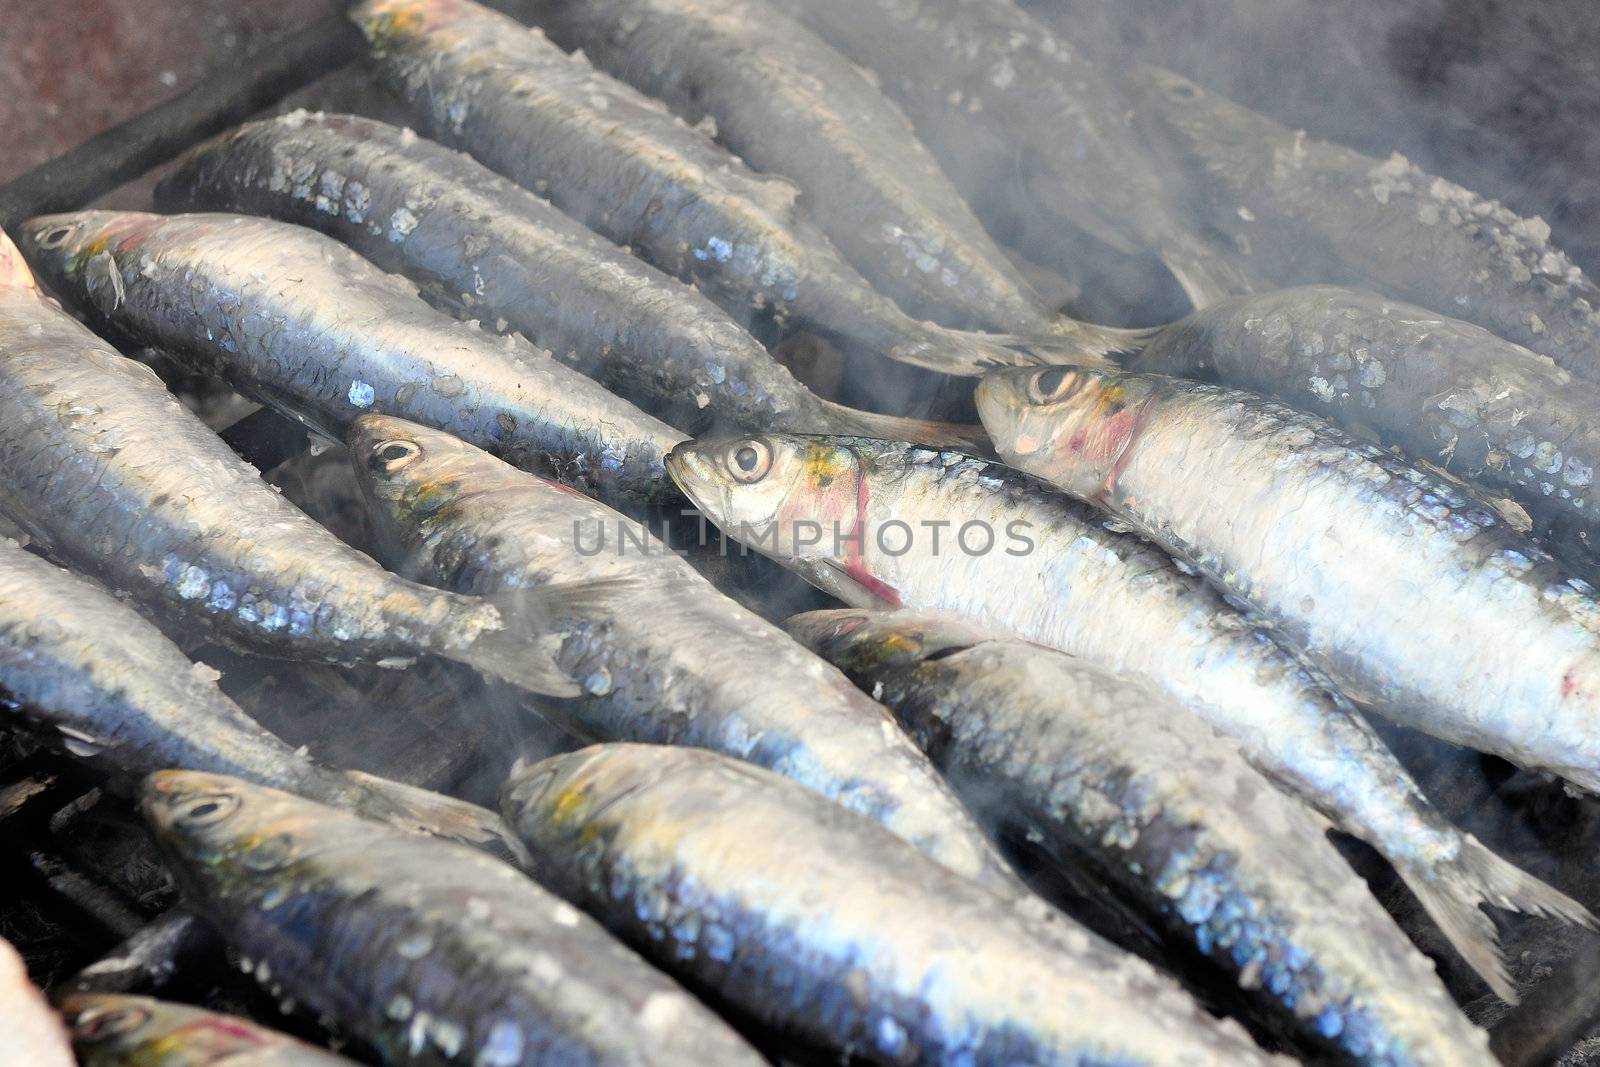 Fresh sardines being grilled in a charcoal grill with smoke around